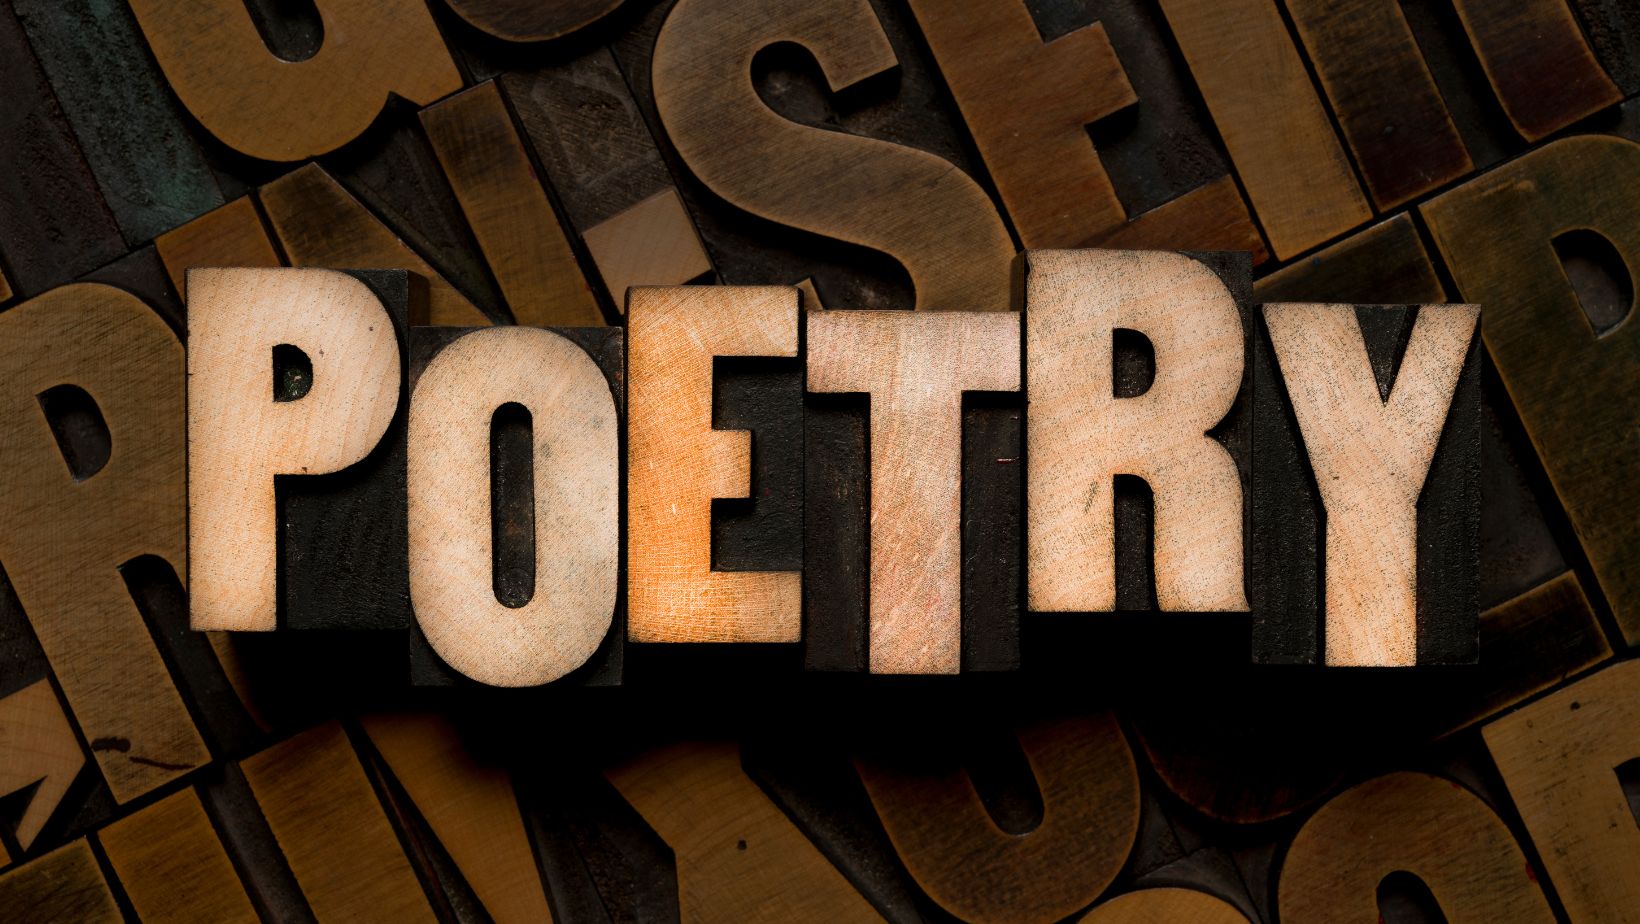 what motif is addressed in both forms of poetry?